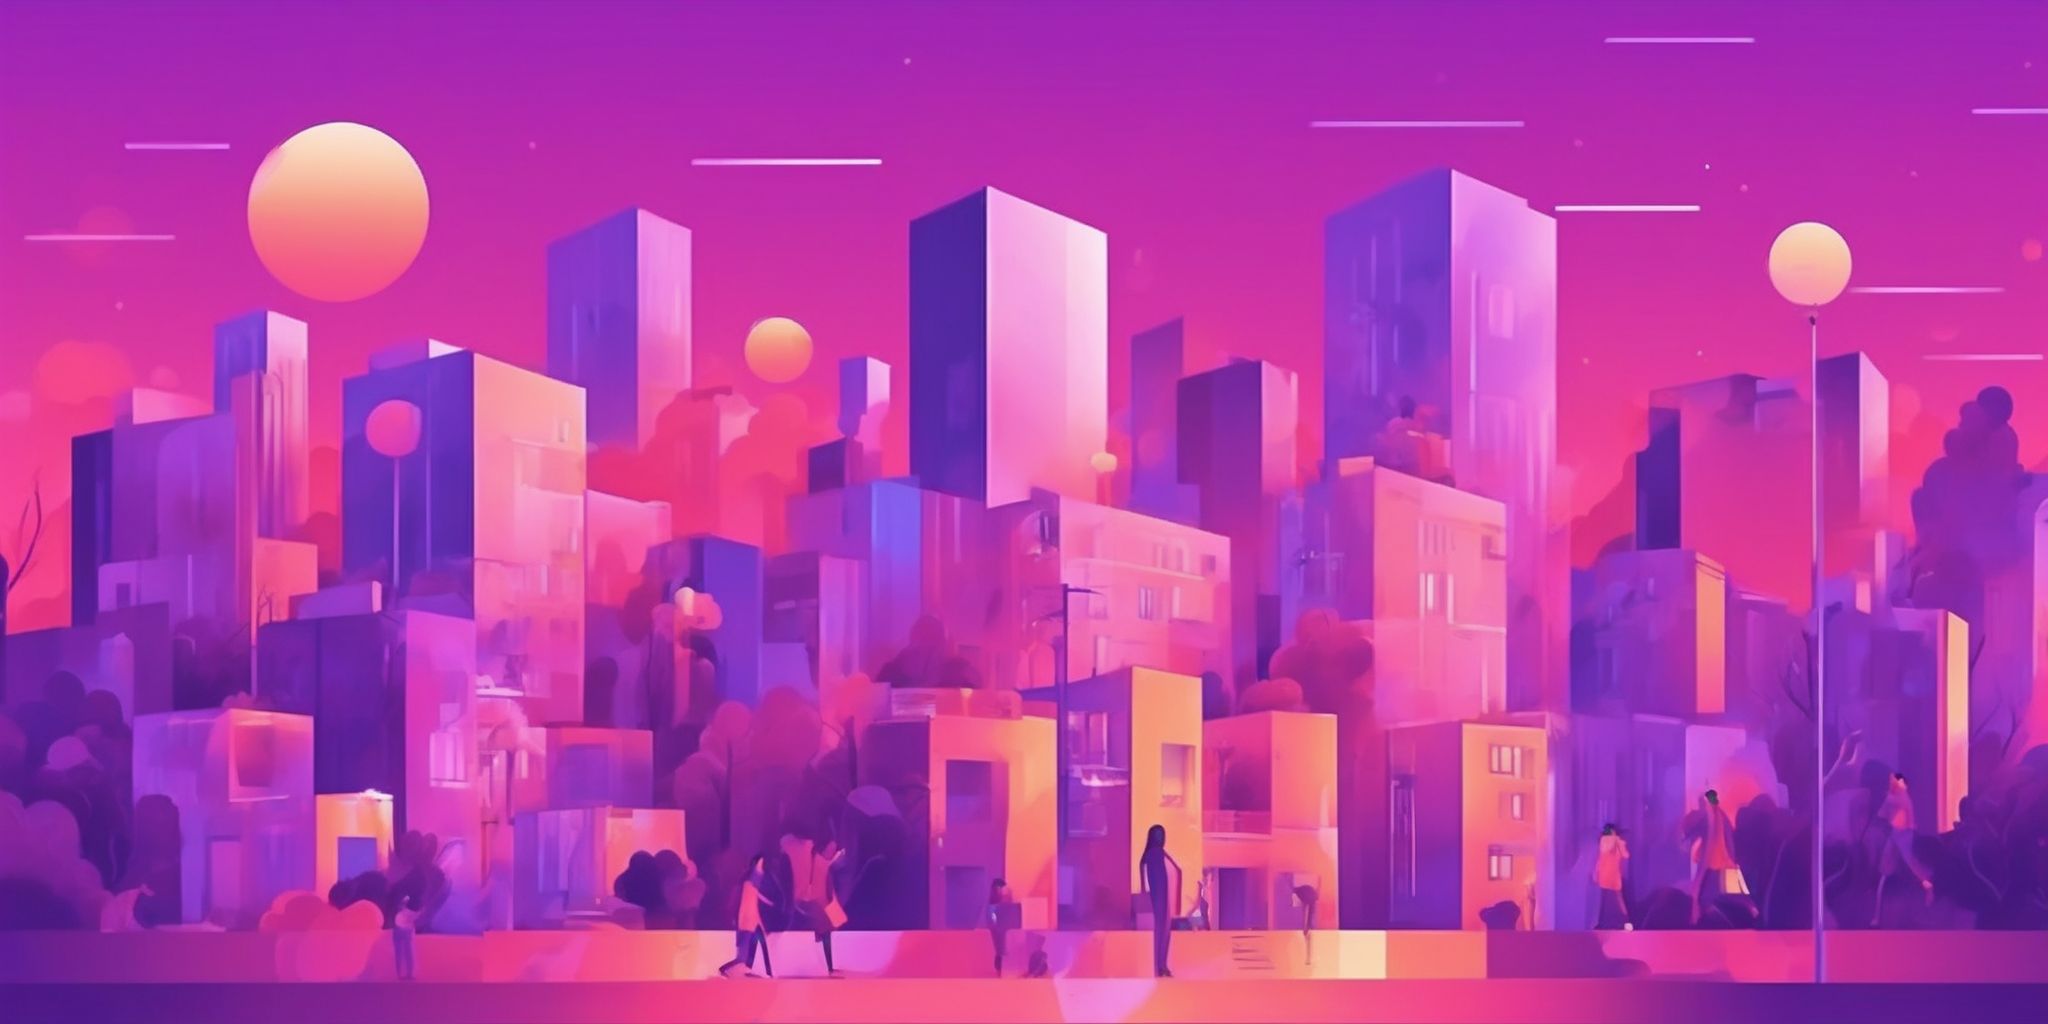 Campaign in flat illustration style, colorful purple gradient colors